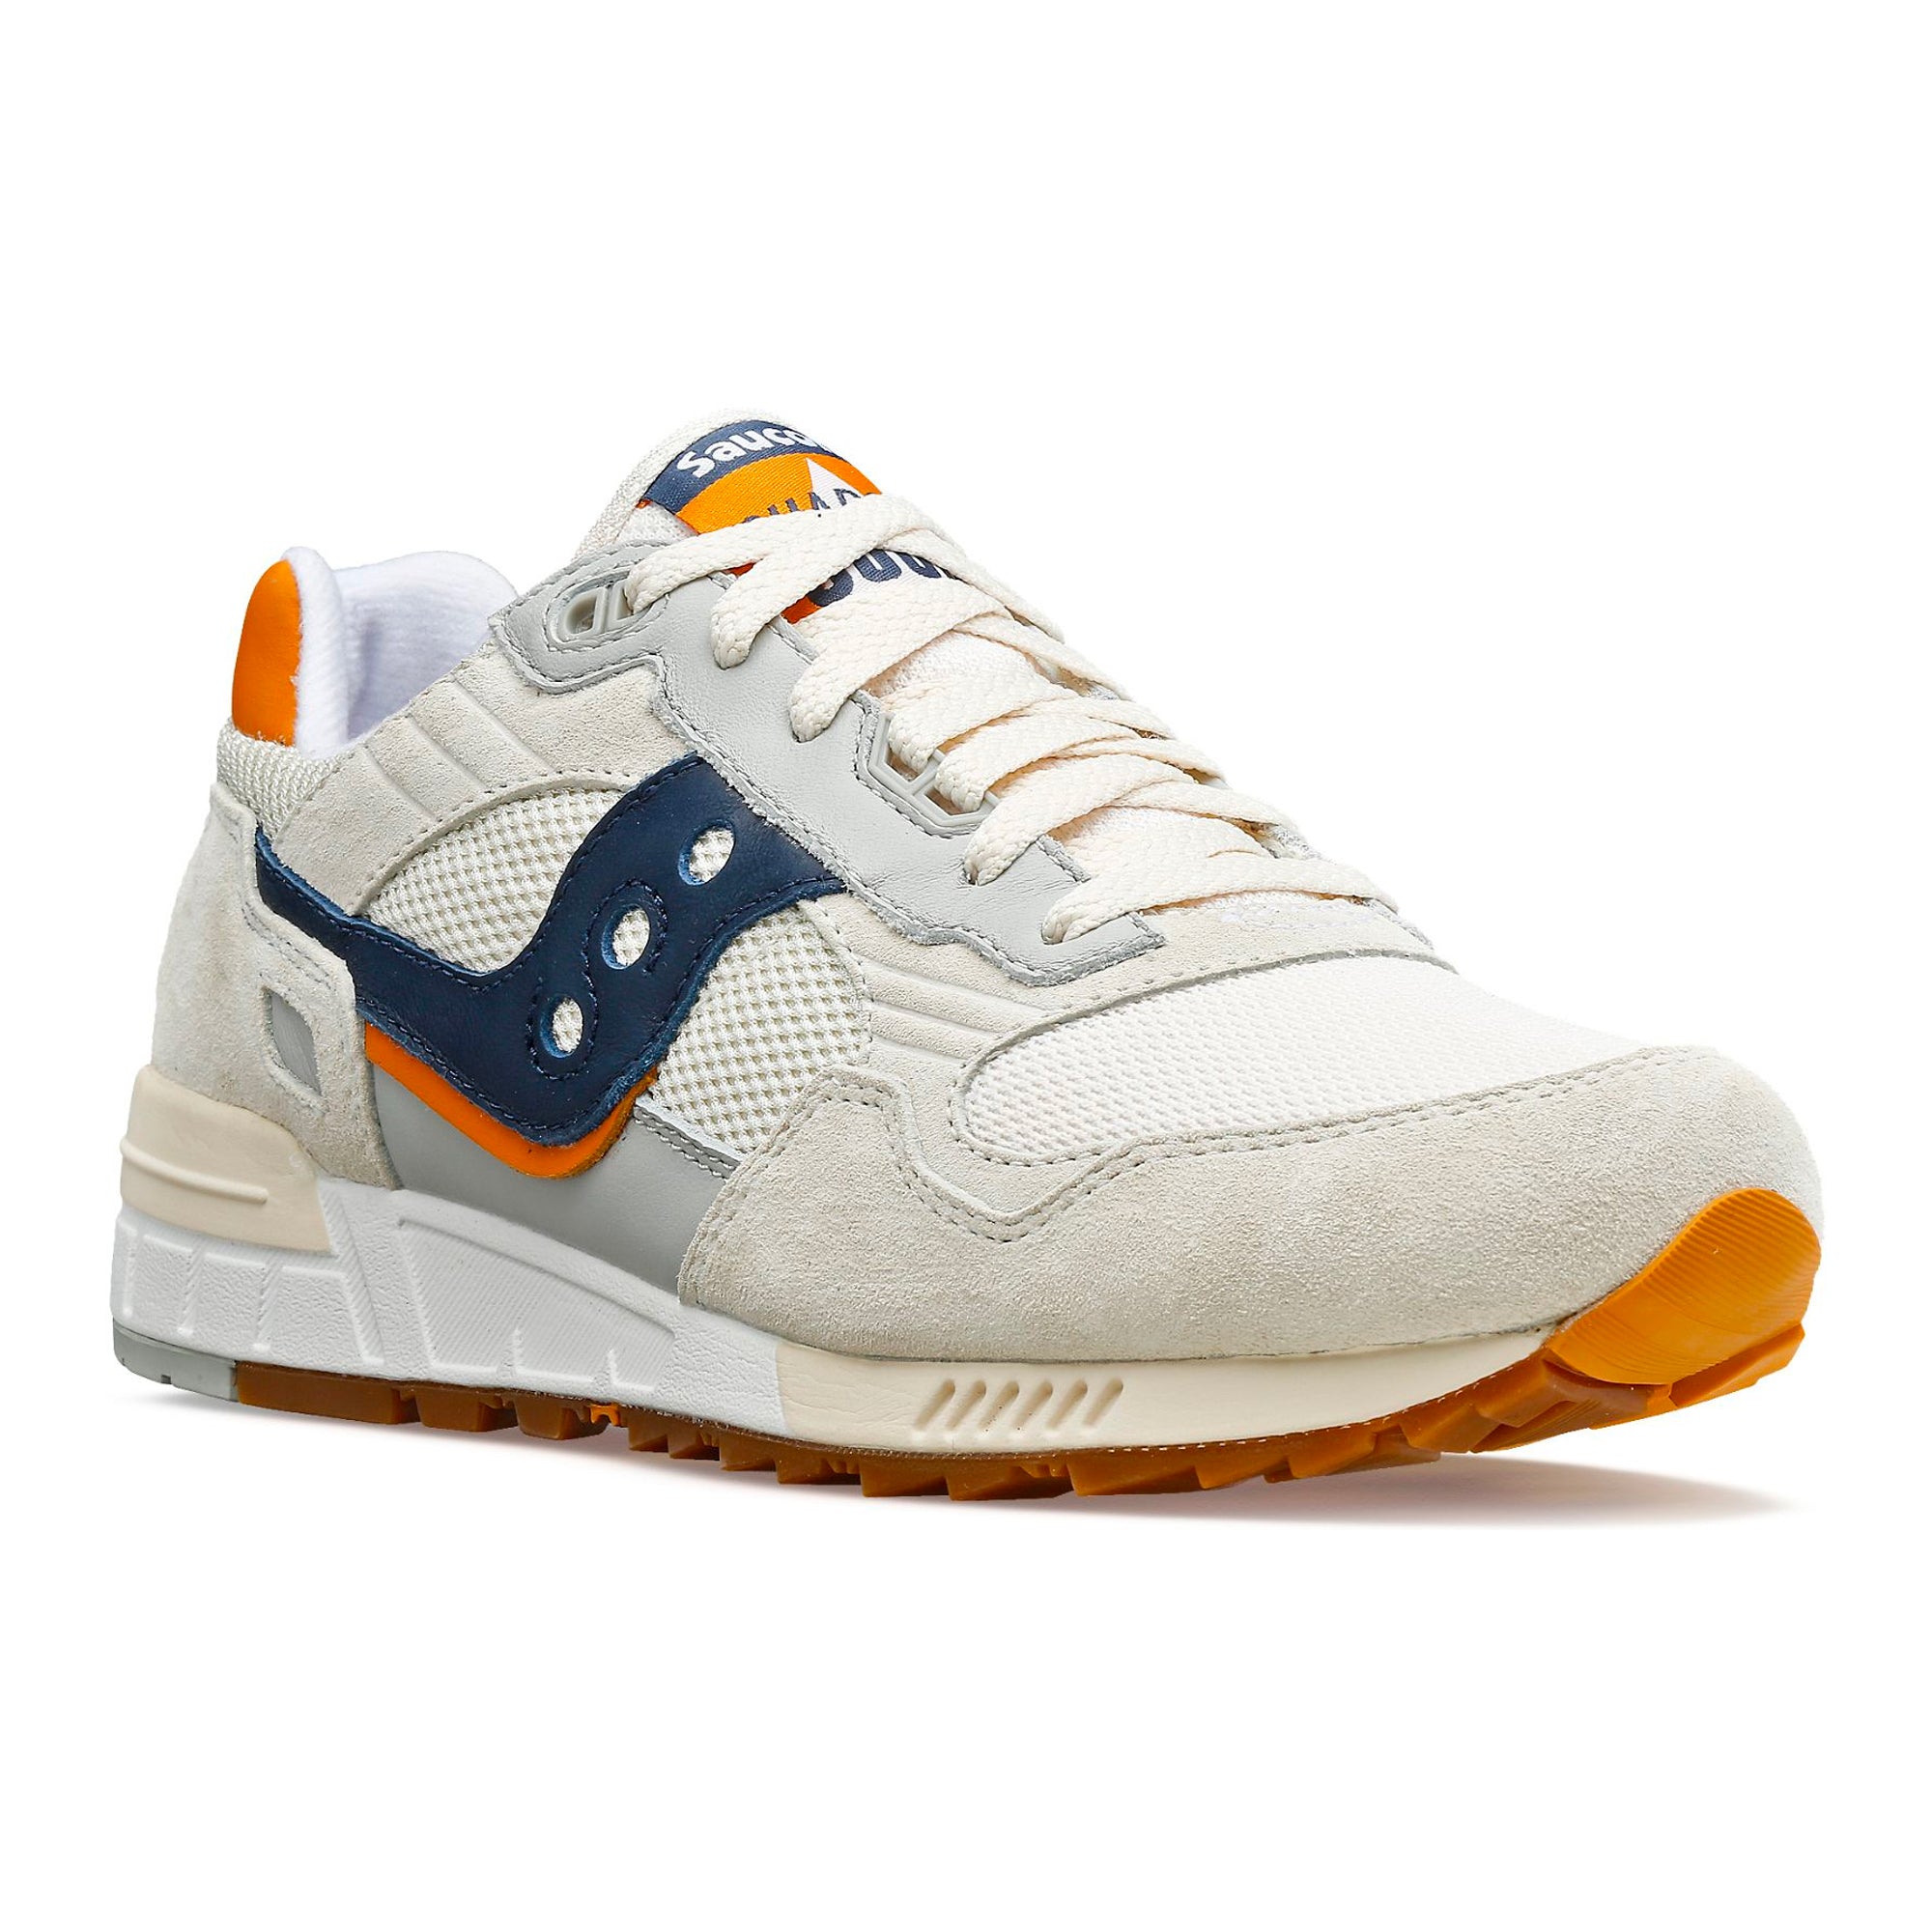 Saucony Shadow 5000 Premium Pack Trainers - Grey/Navy